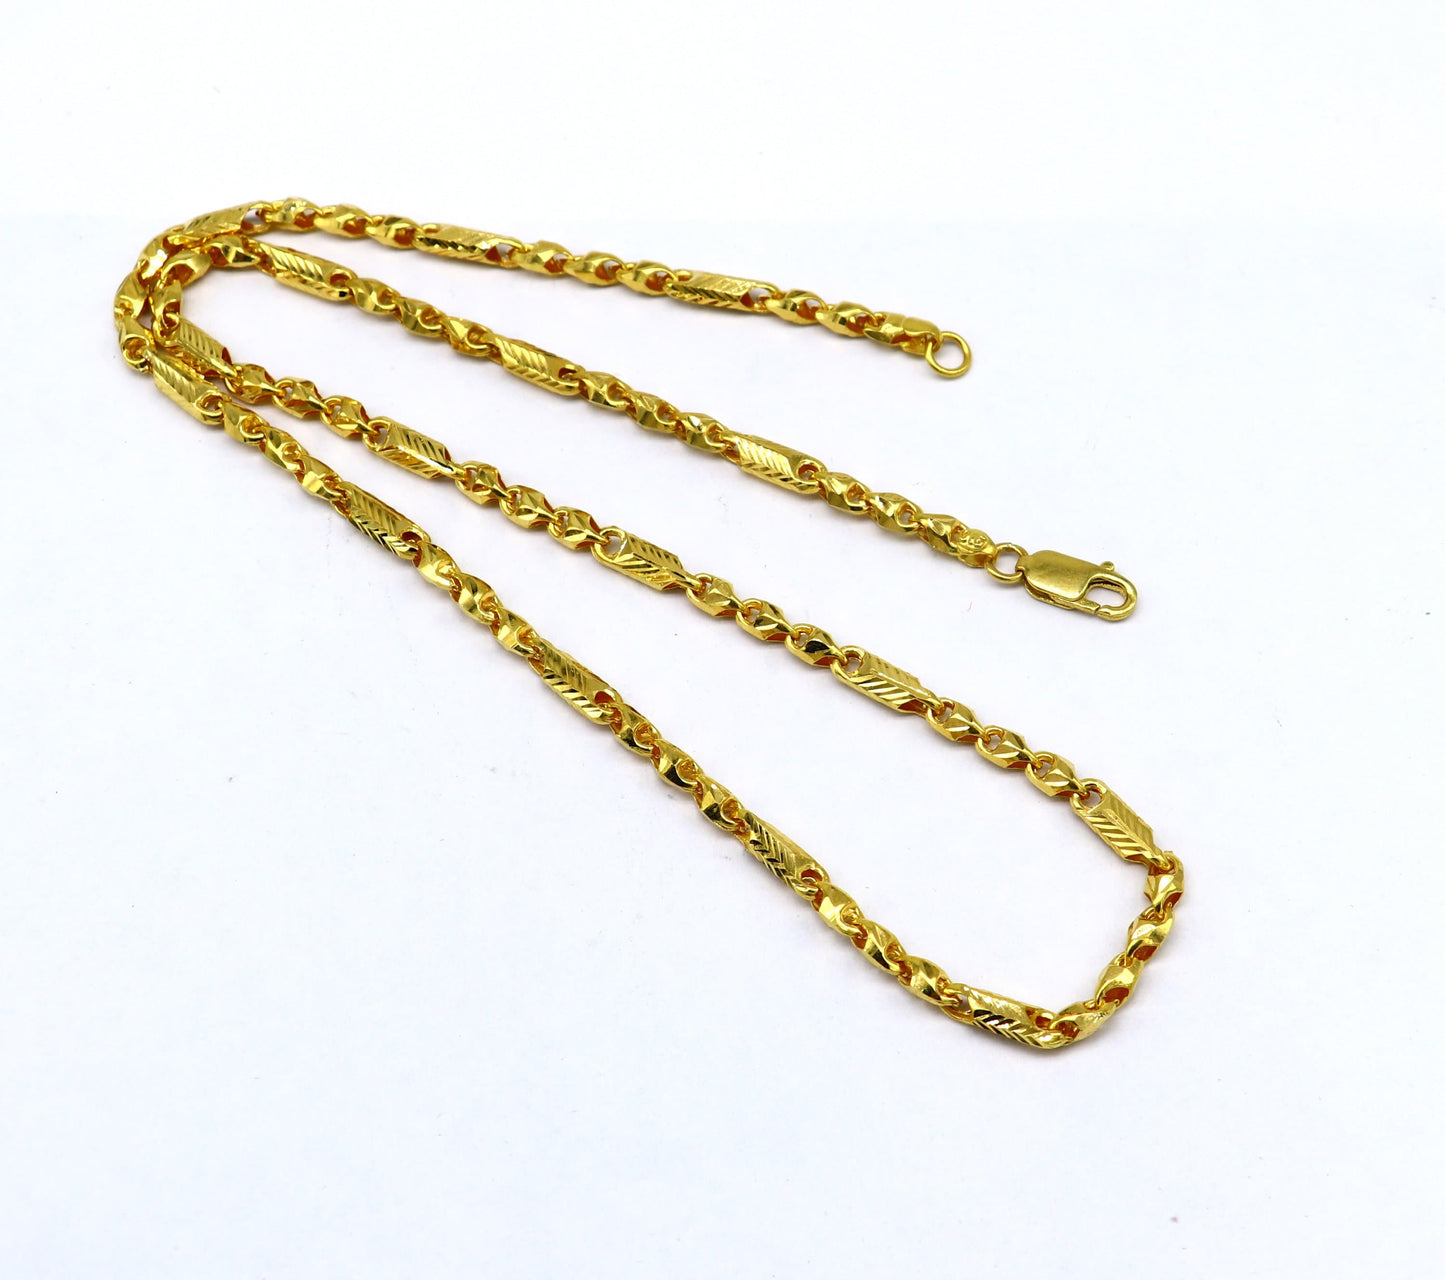 22karat yellow gold handmade unique baht design all sizes chain necklace amazing men's gifting wedding jewelry best unisex necklace  ch576 - TRIBAL ORNAMENTS